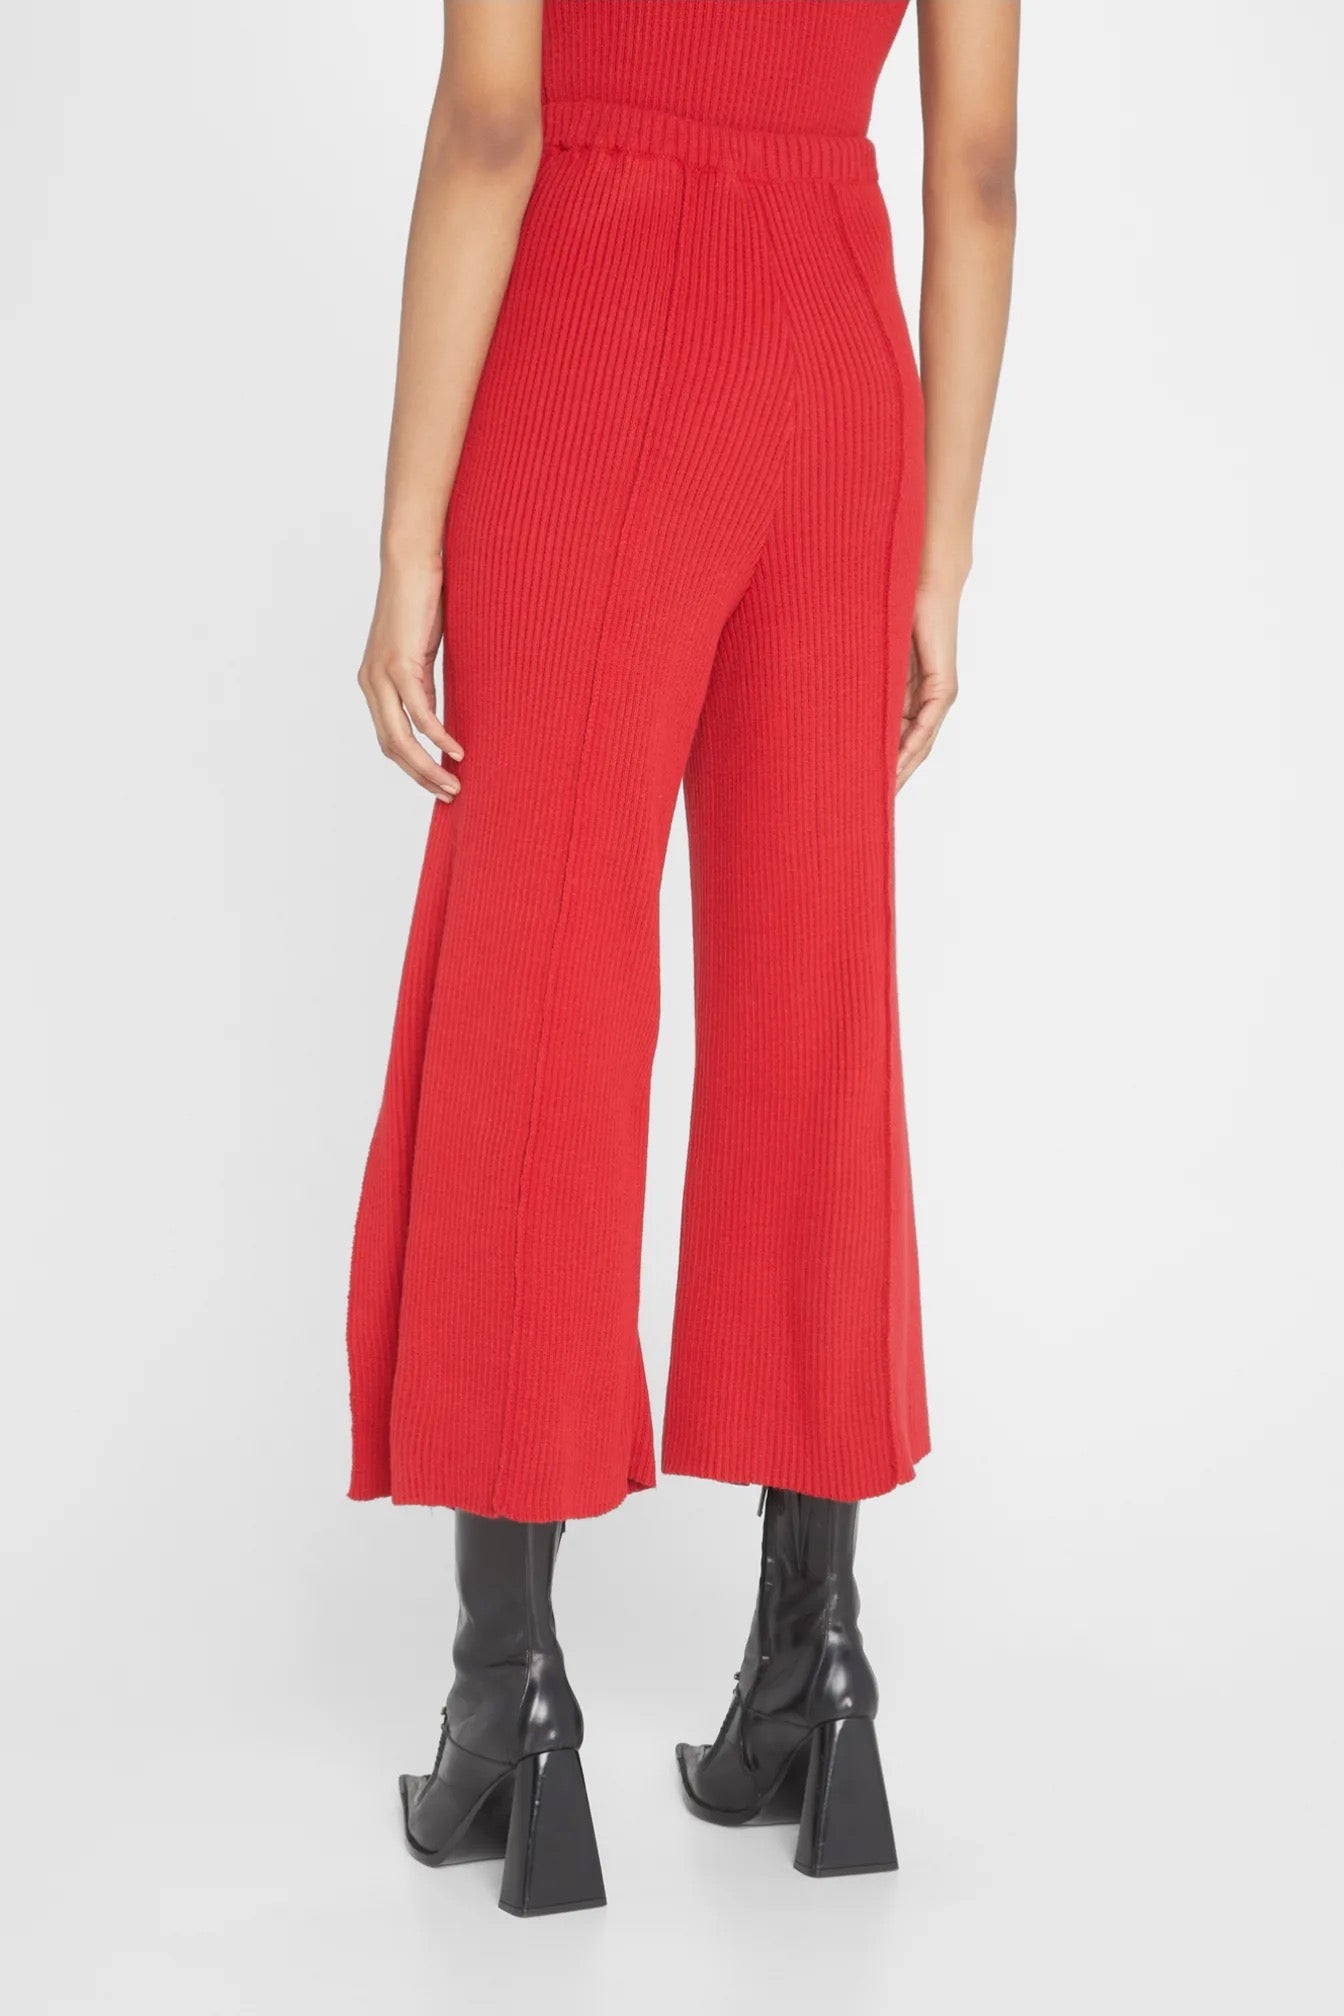 Thebe Magugu- Split Front Trousers: Red